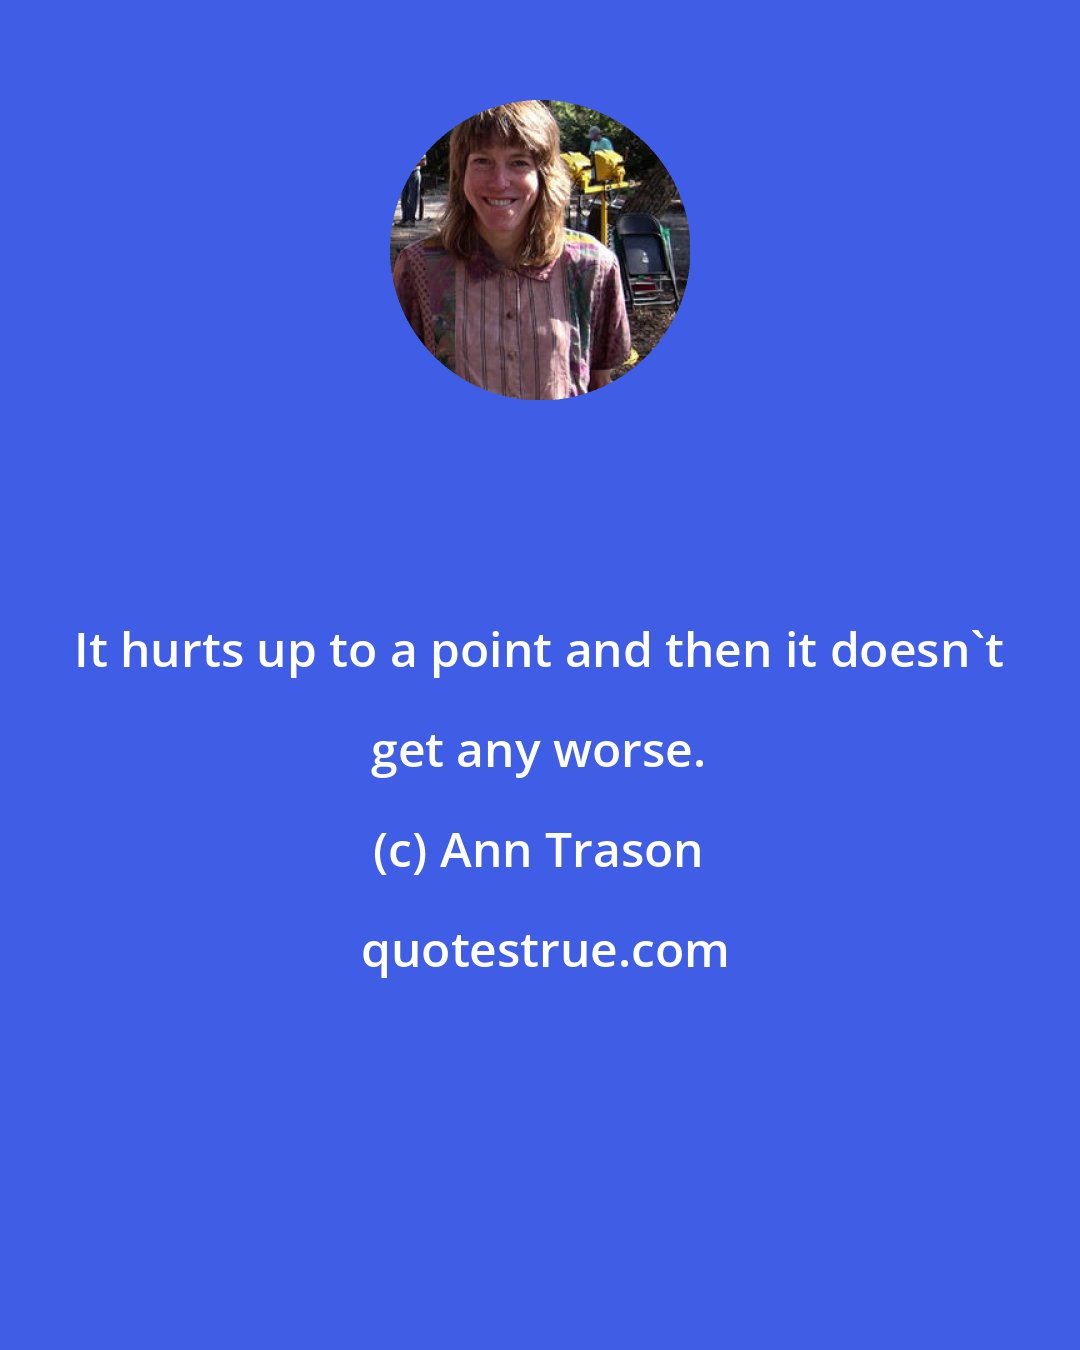 Ann Trason: It hurts up to a point and then it doesn't get any worse.